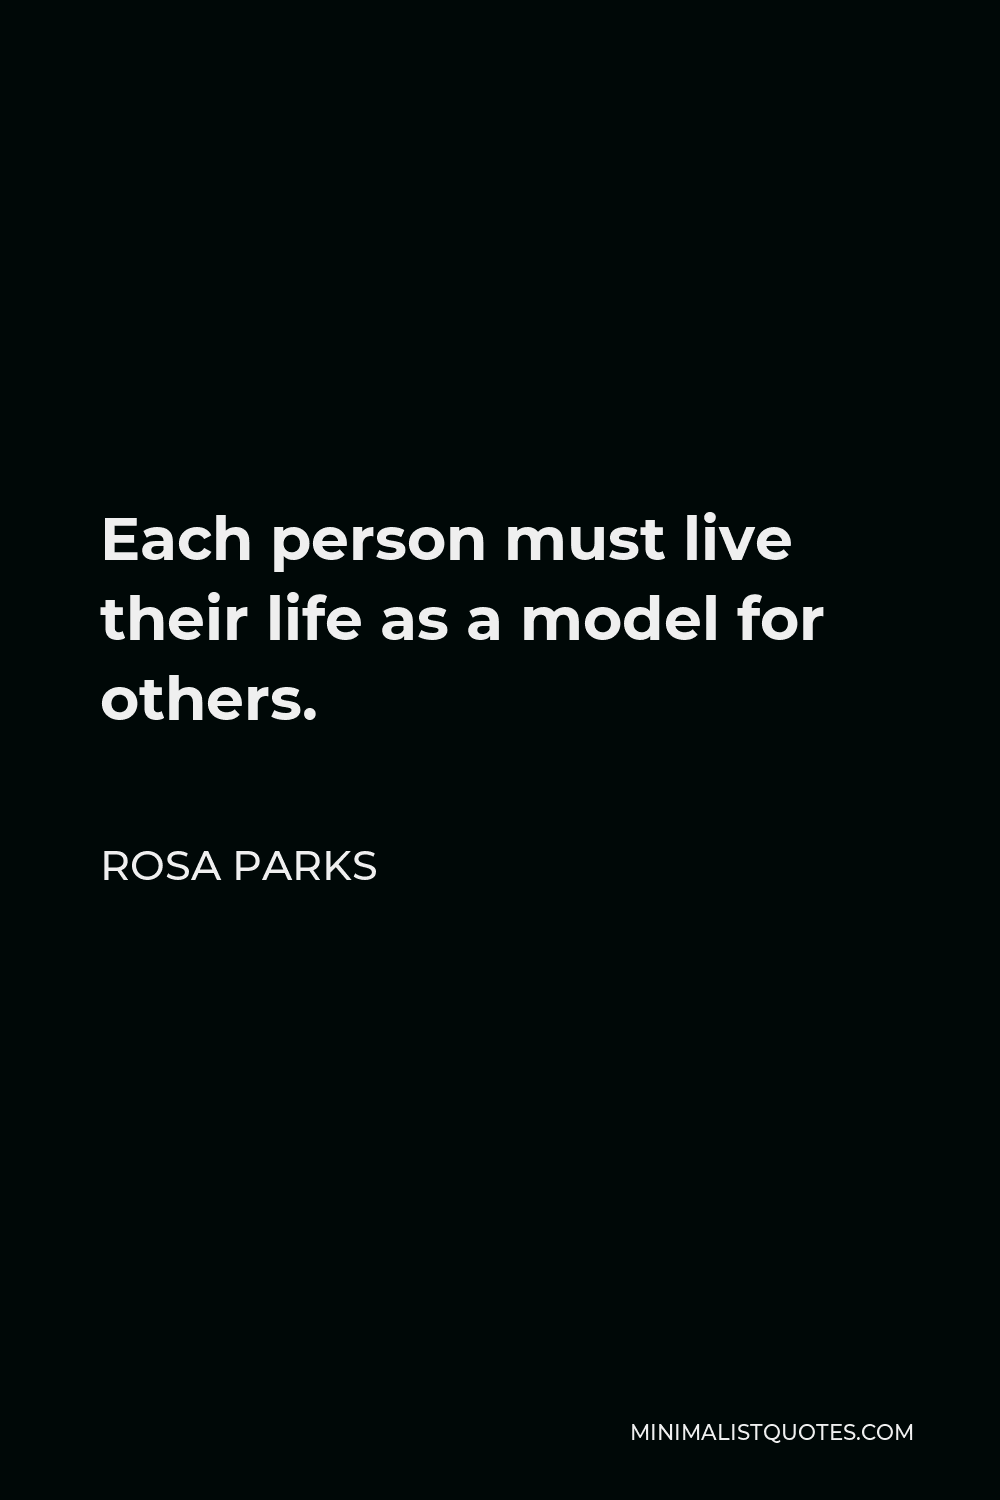 Rosa Parks Quote - Each person must live their life as a model for others.